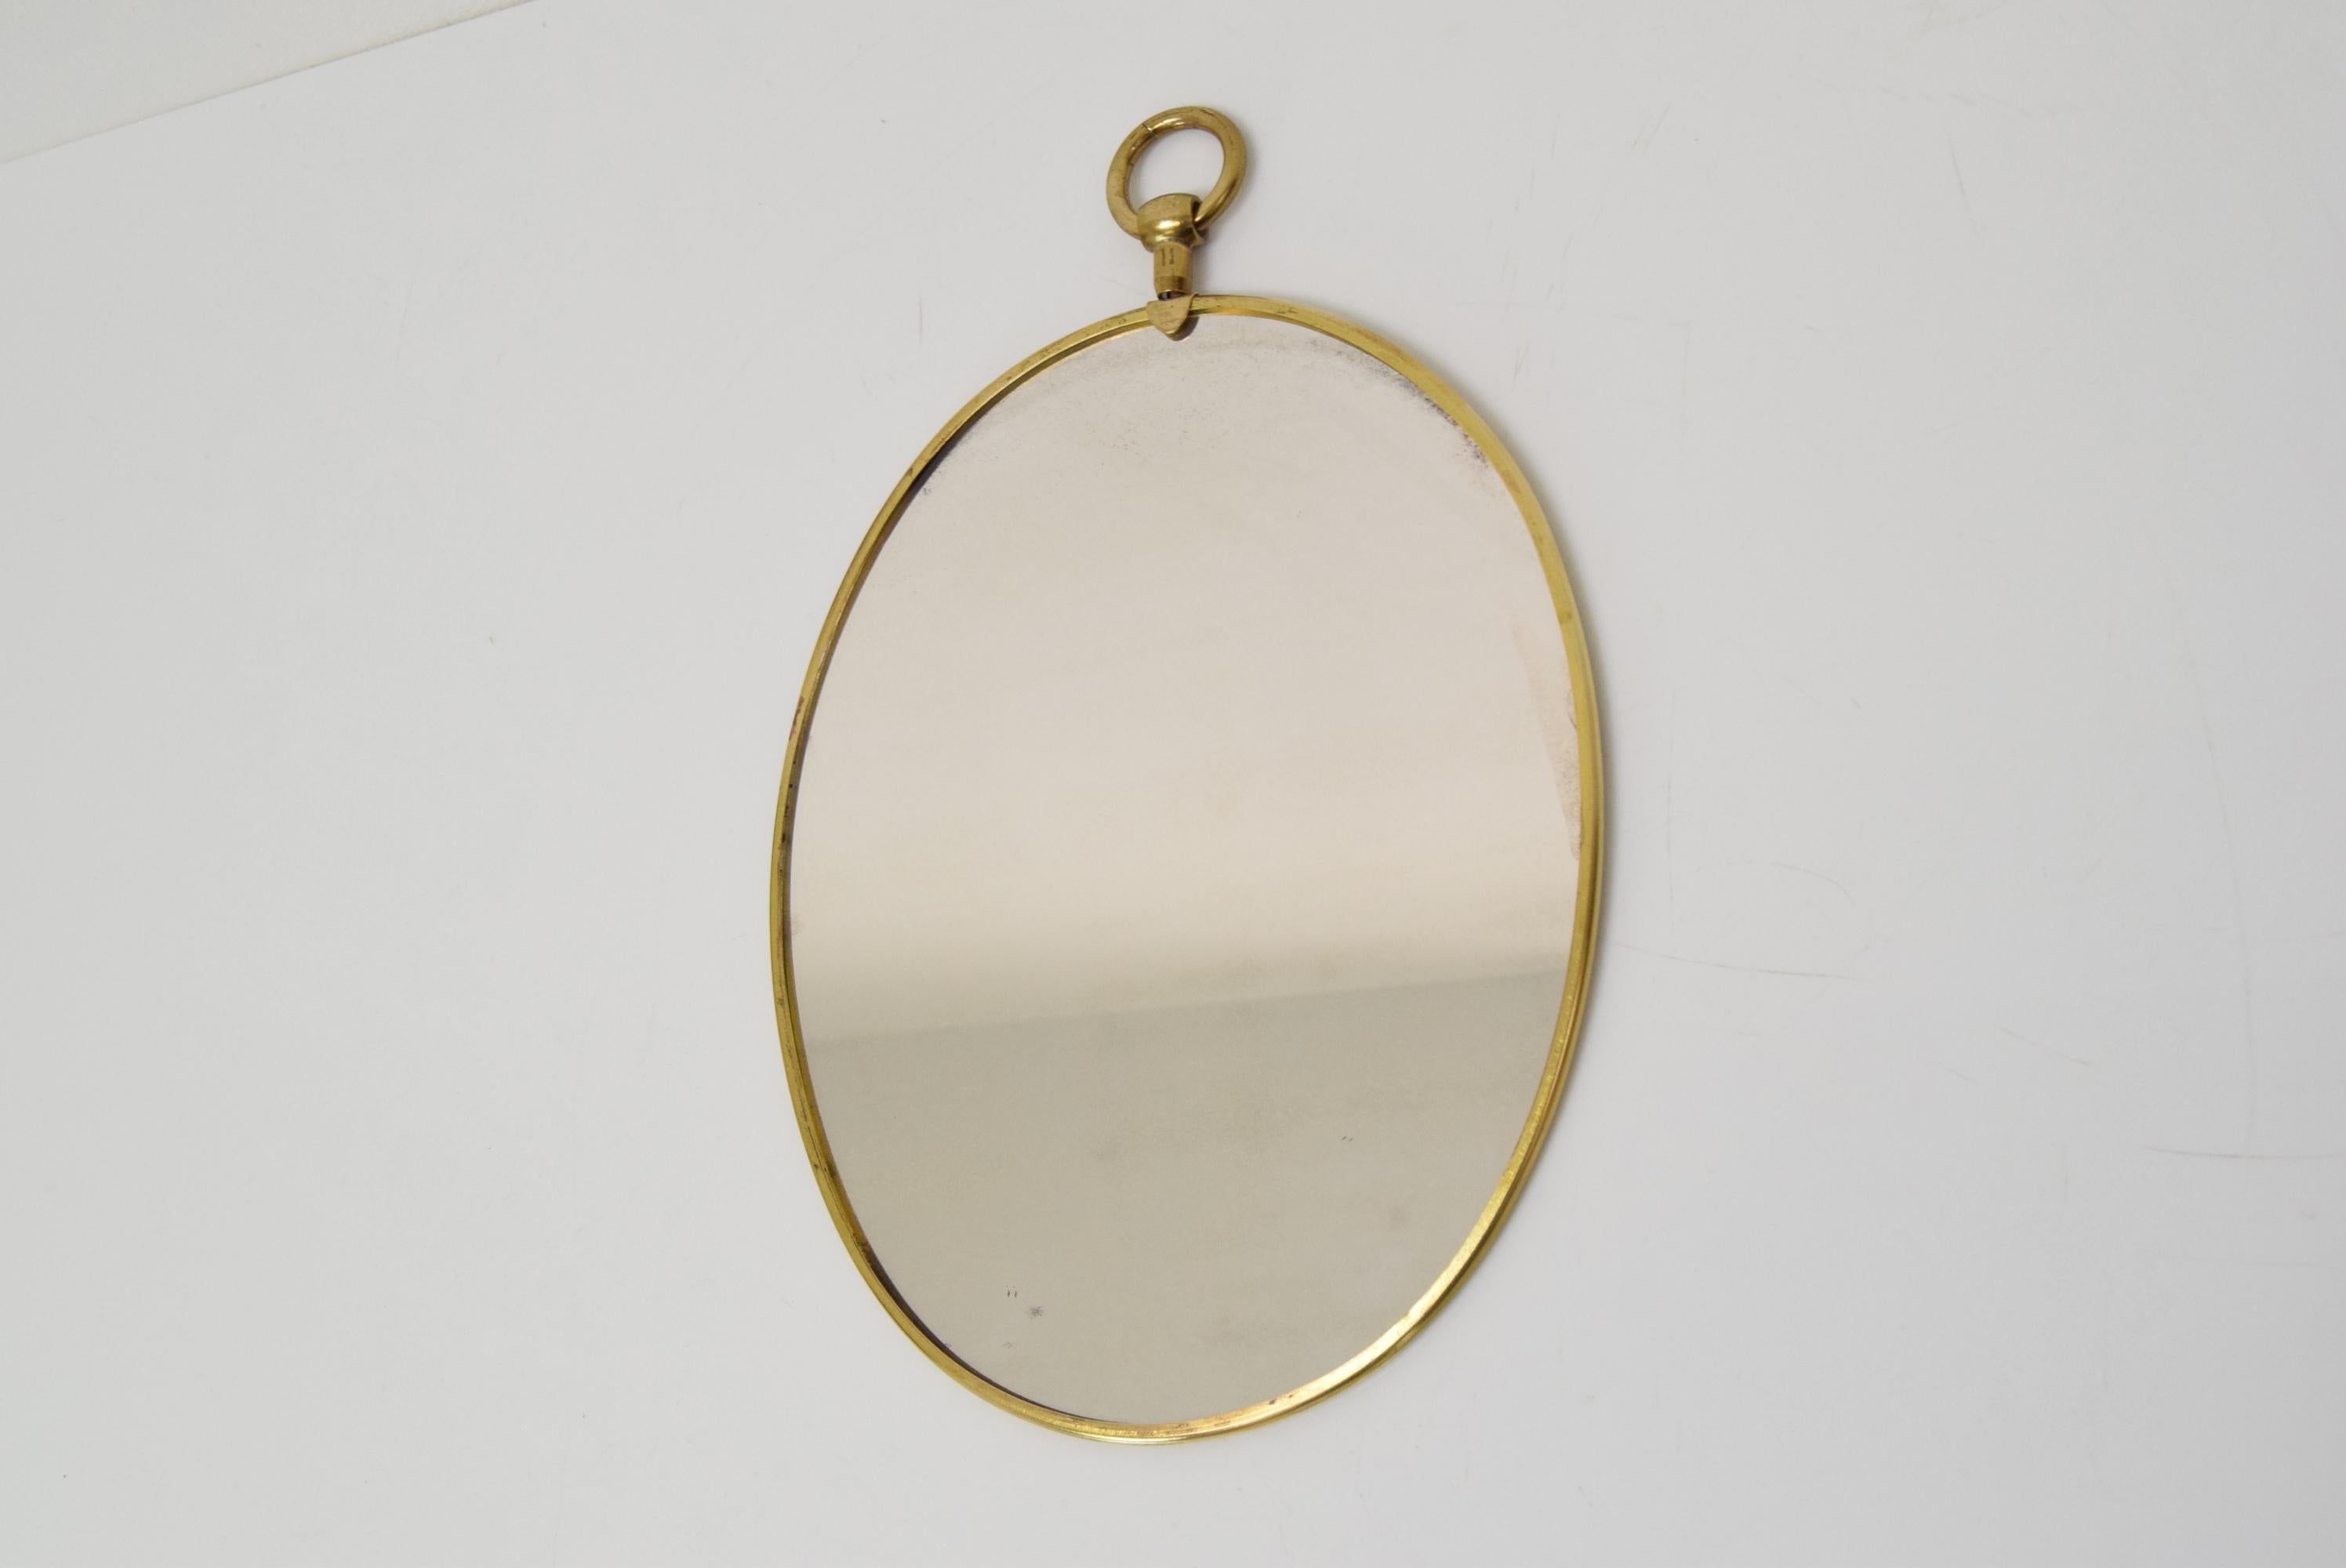 
Made in Czechoslovakia
Made of Mirror,Brass
With Aged Patina
Re-polished
Good Original Condition